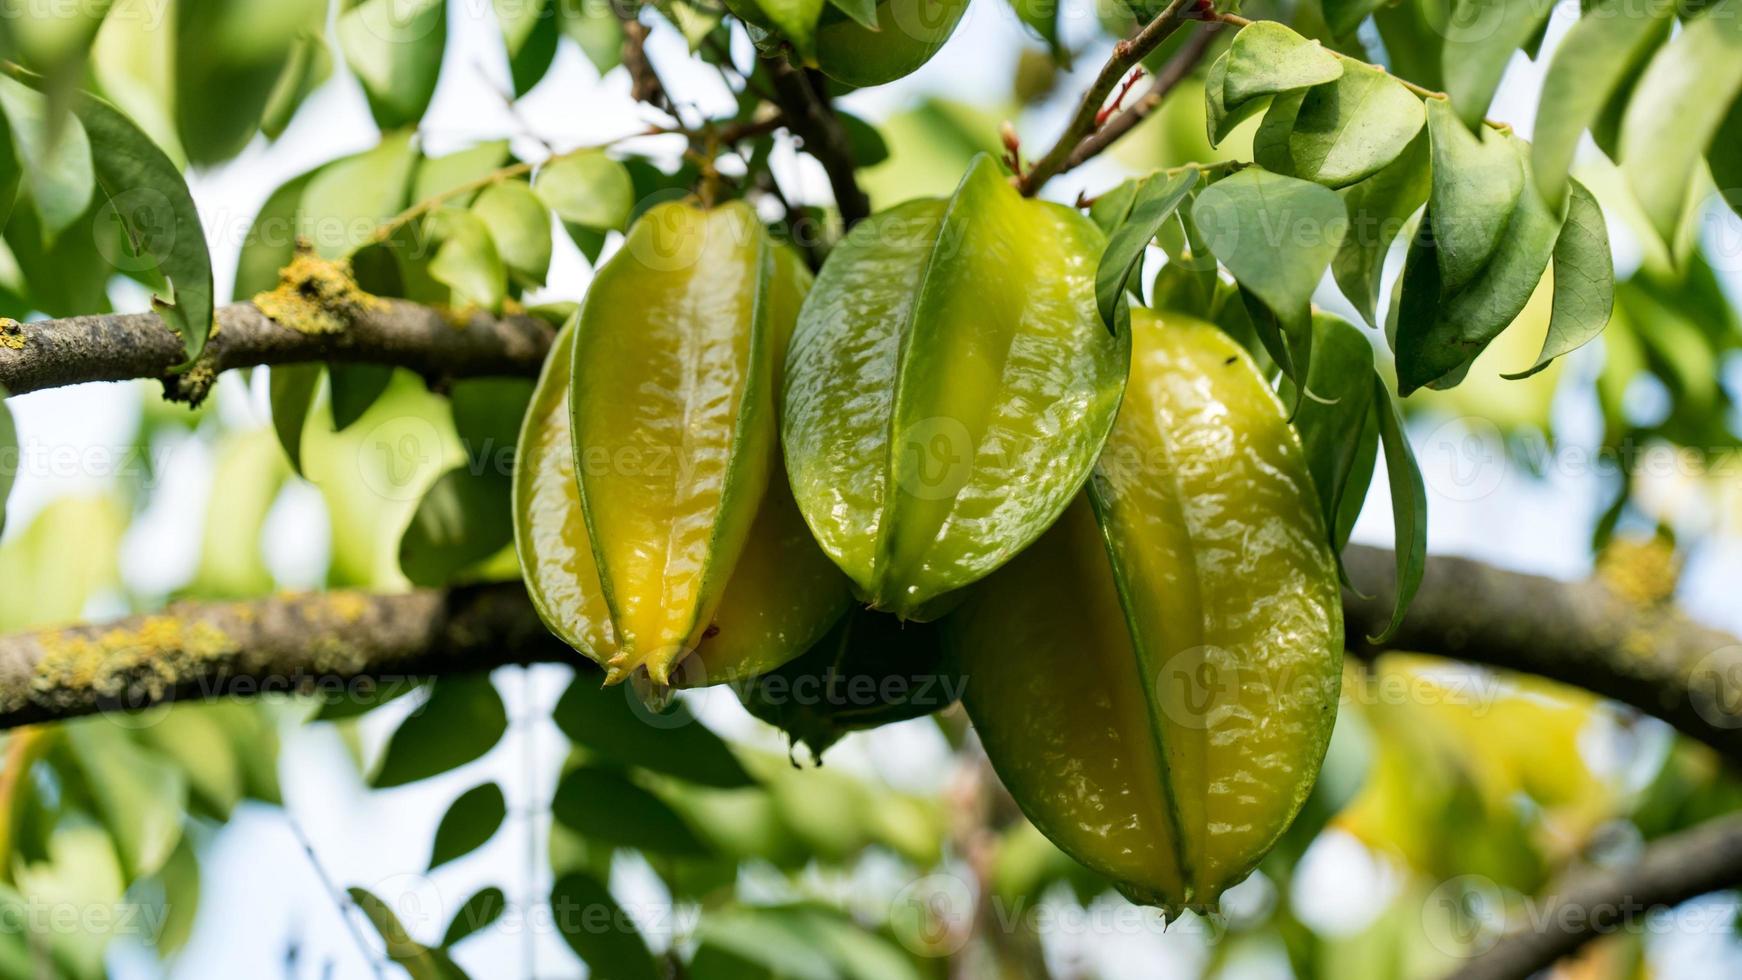 Close-up of Carambola starfruit growing on branch with green leaves, Israel photo